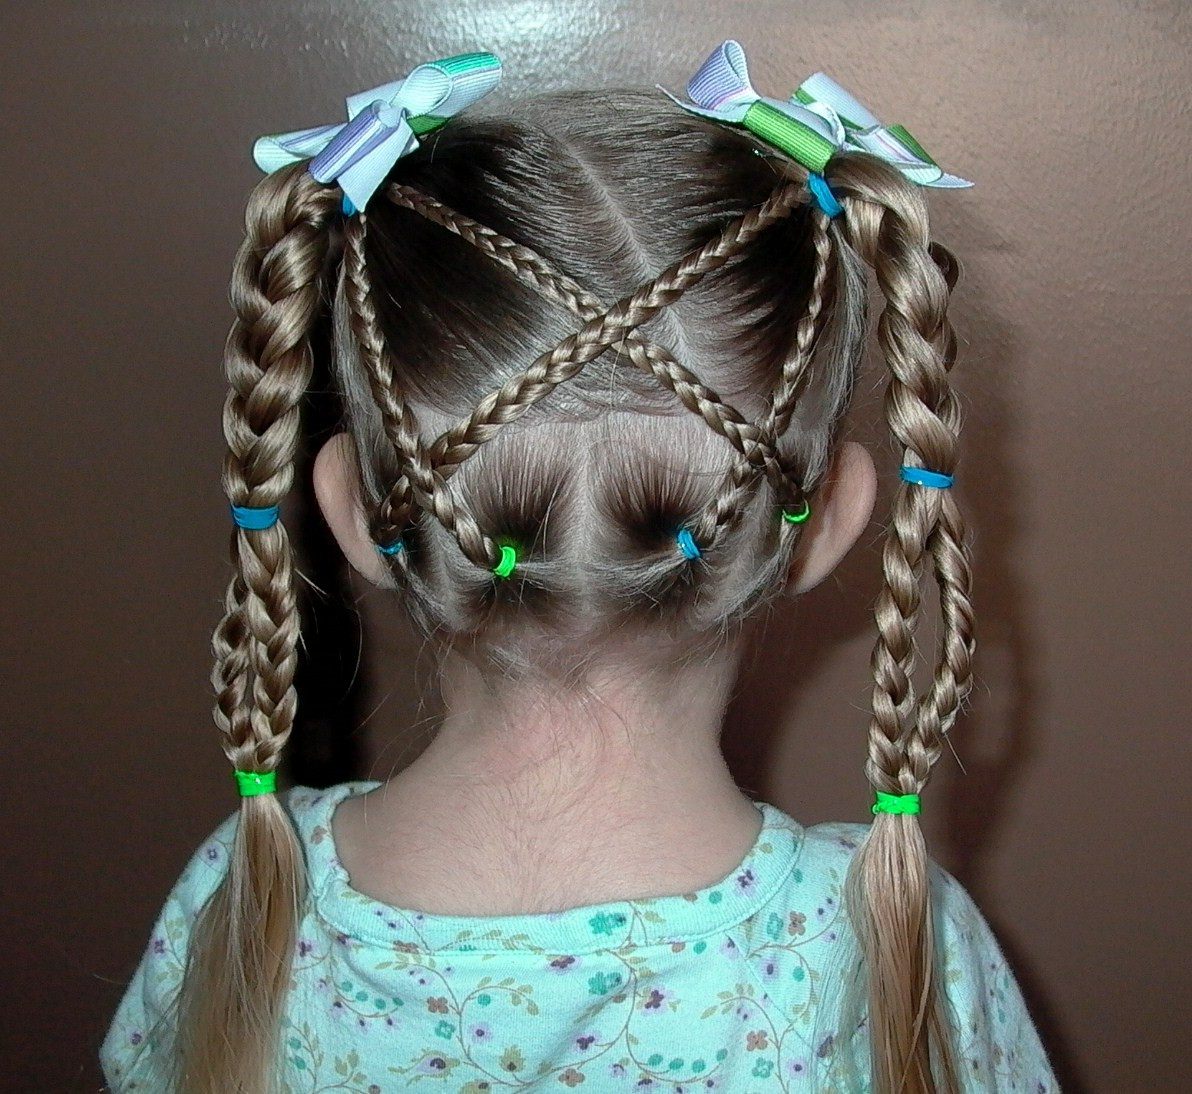 Hairstyles For Little Girls Braids
 Braids for Little Girl s Hair Everything About Fashion